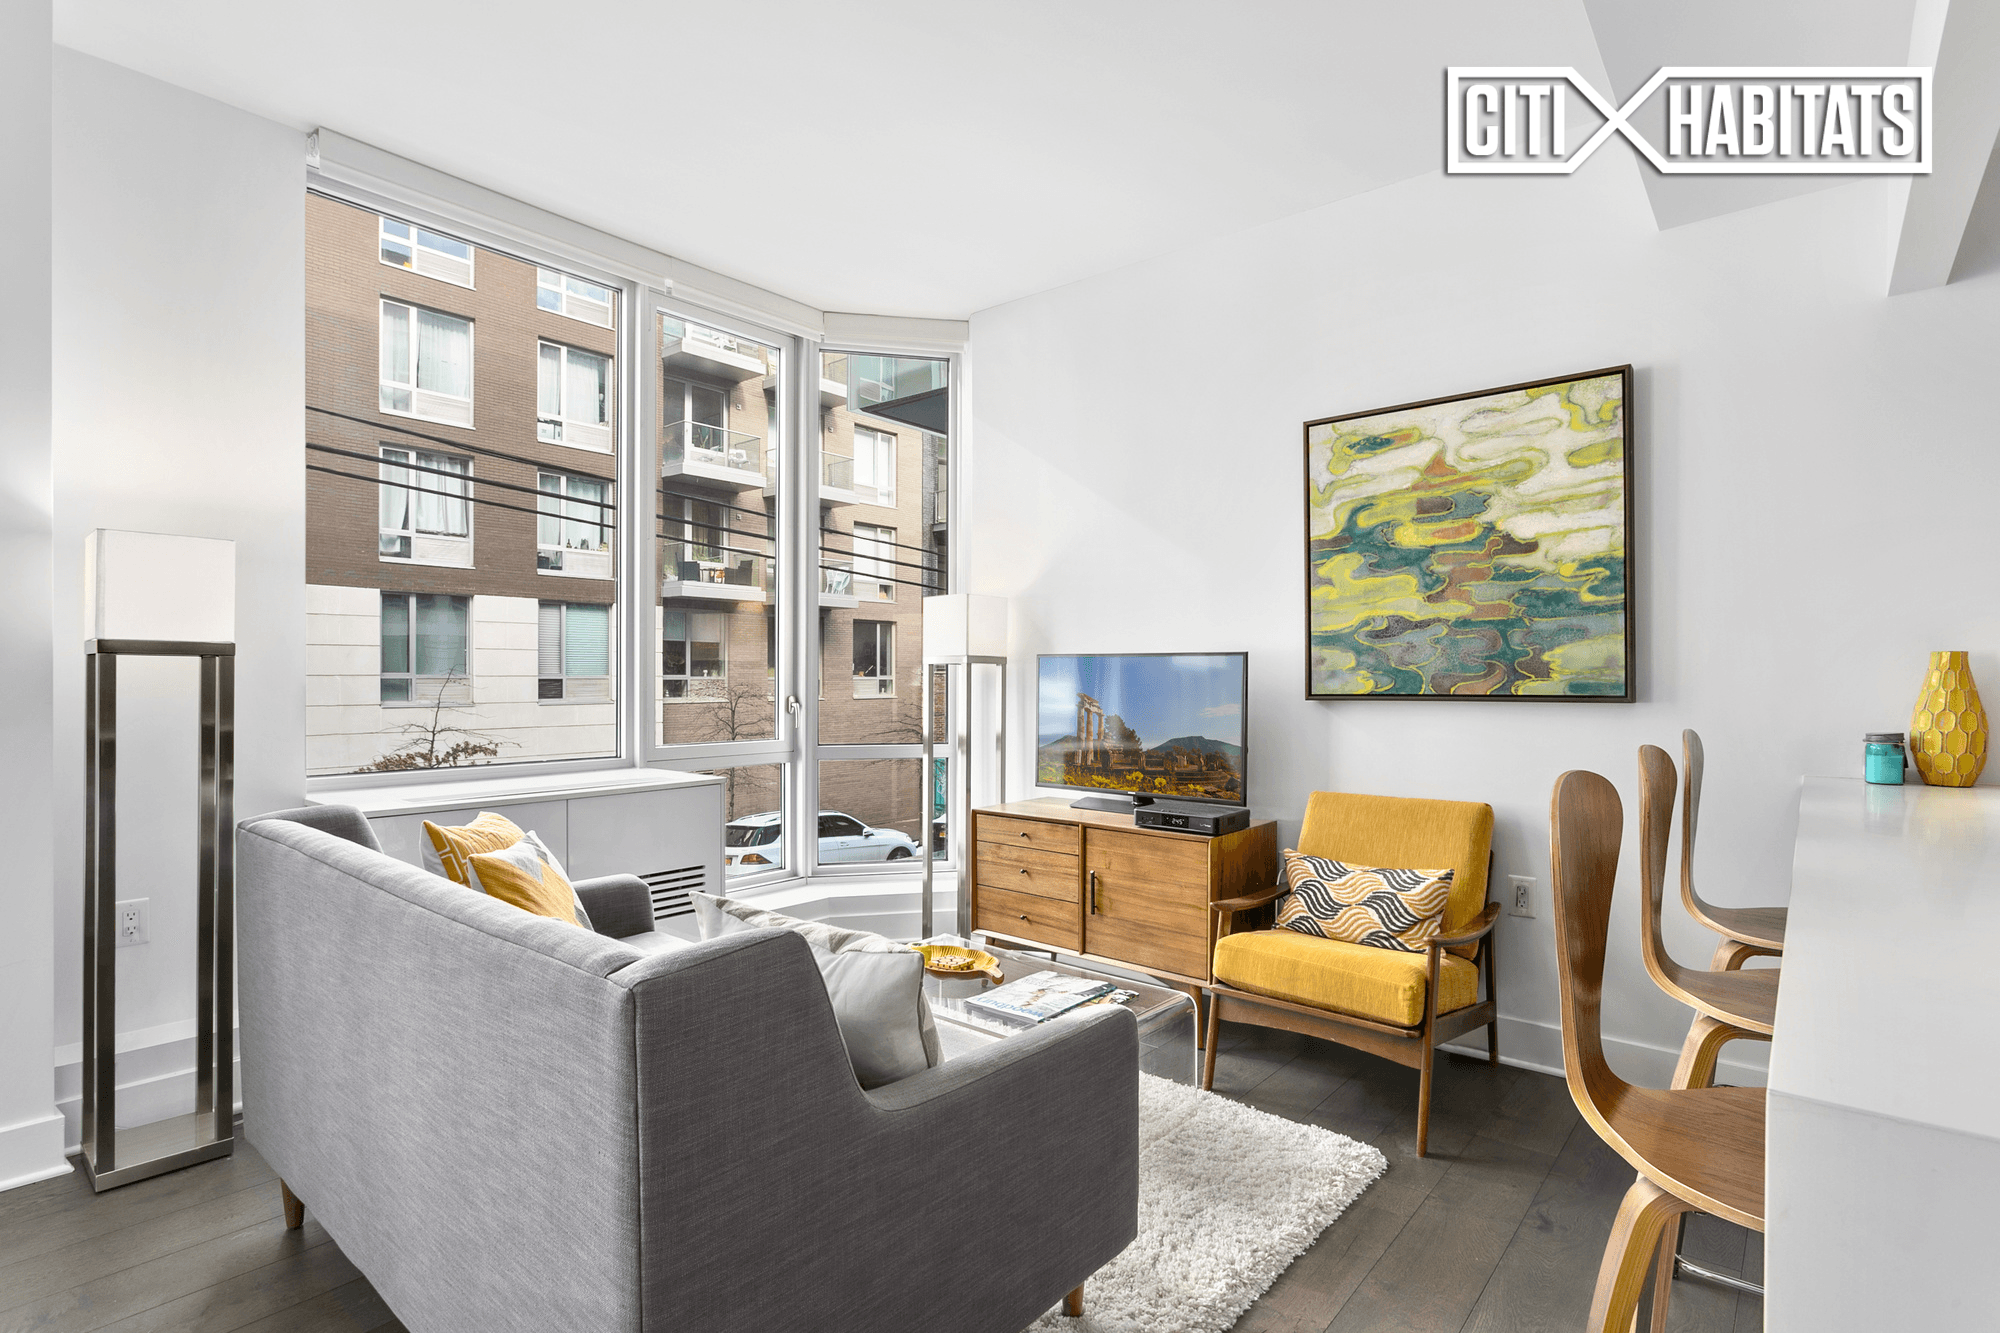 Live large in this newly constructed Alcove Studio home located in the heart of trendy Williamsburg.